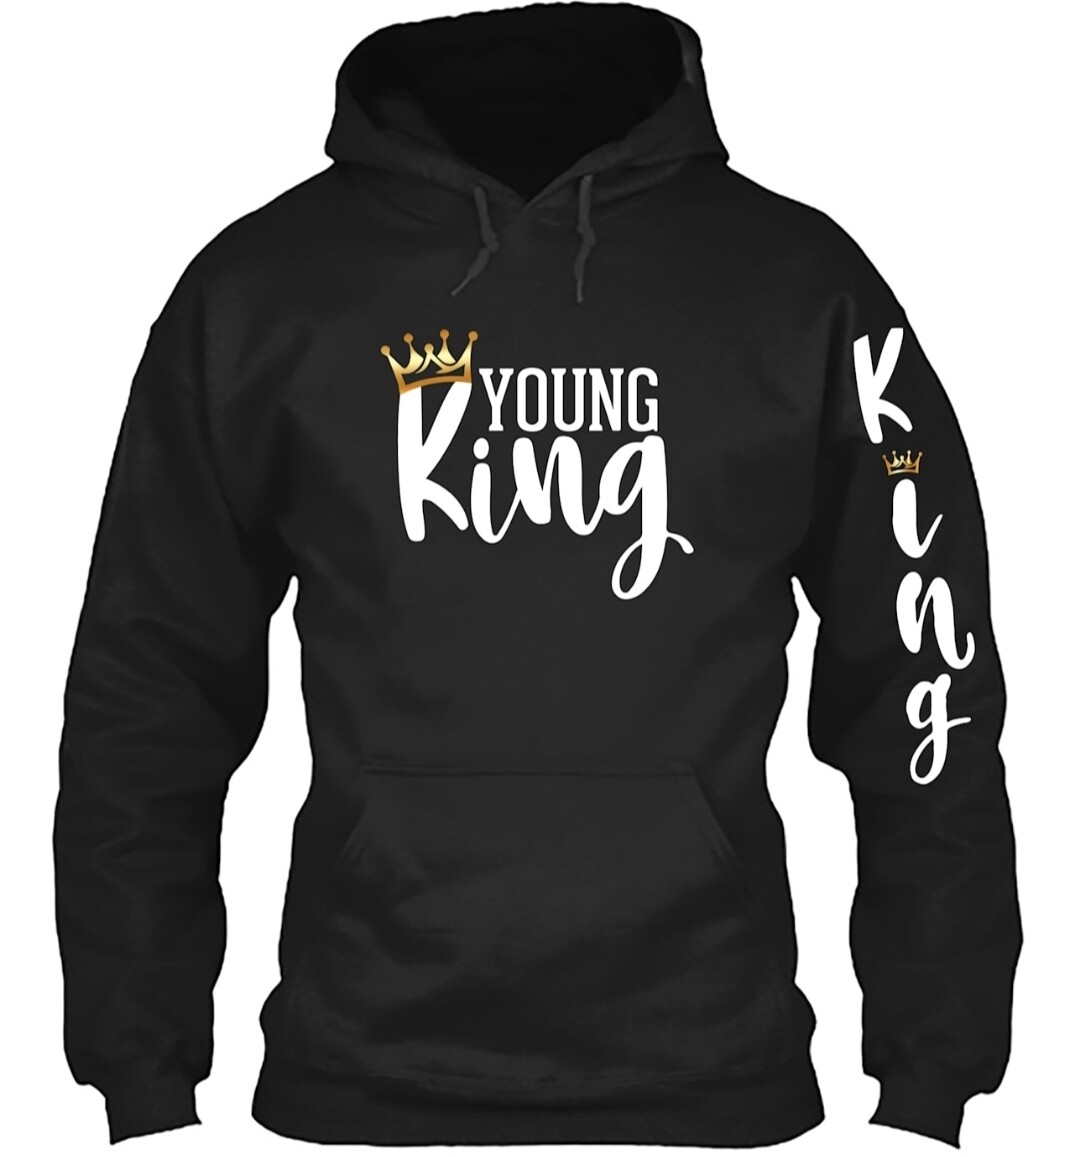 YOUNG King Adult Hoodie